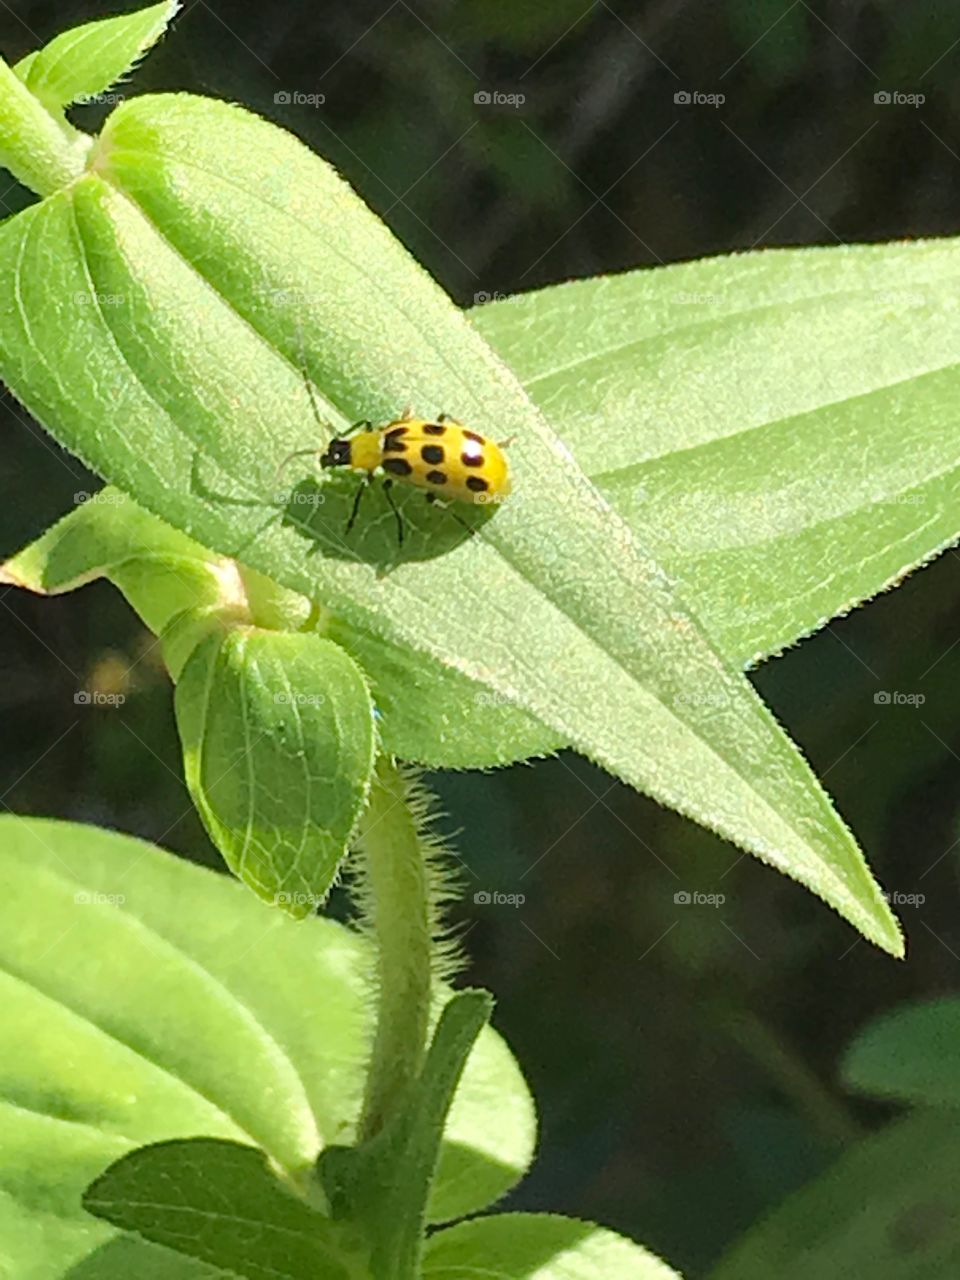 Yellow Beetle with Black spots on Green Leaf